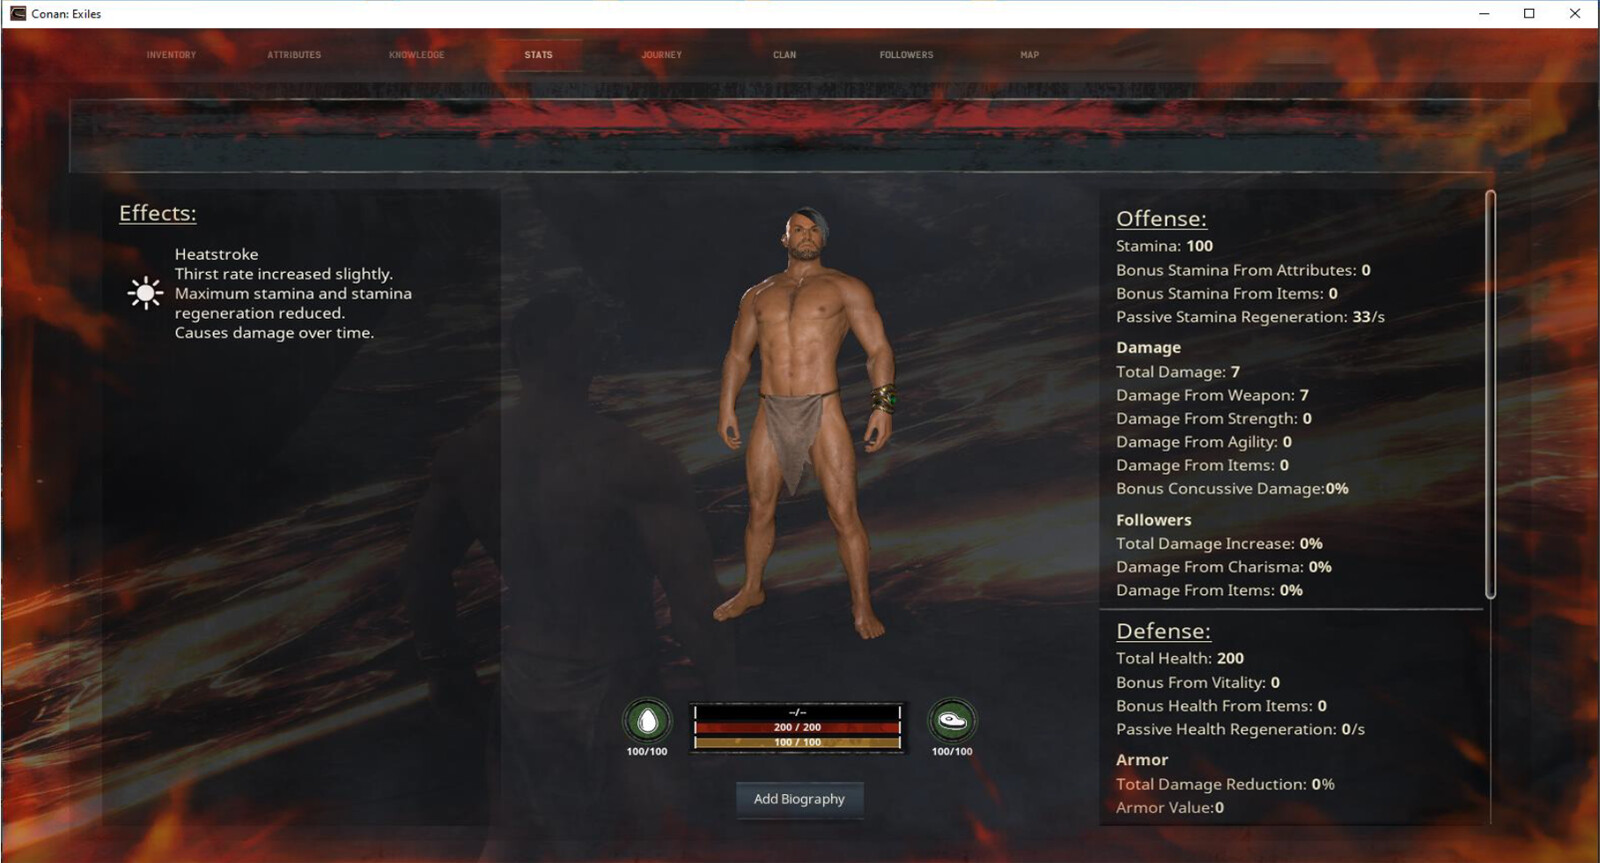 Current UI for Conan Exiles "Stats" screen